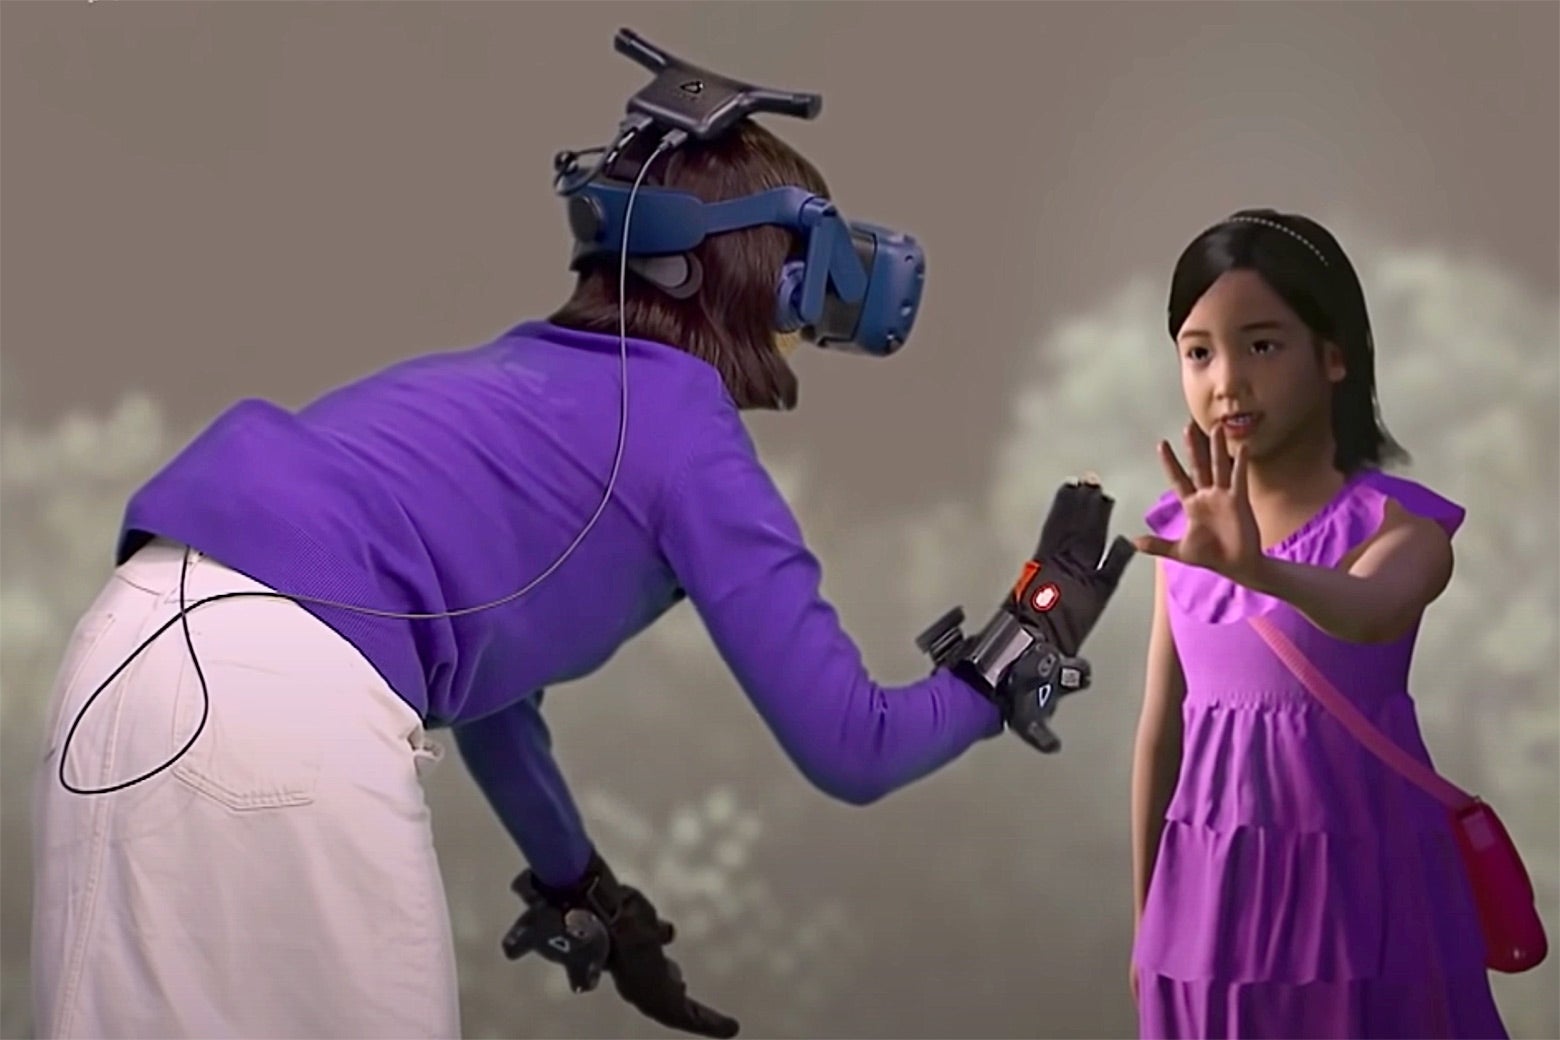 A woman in a headset and gloves reaches out to touch the hand of a young girl.